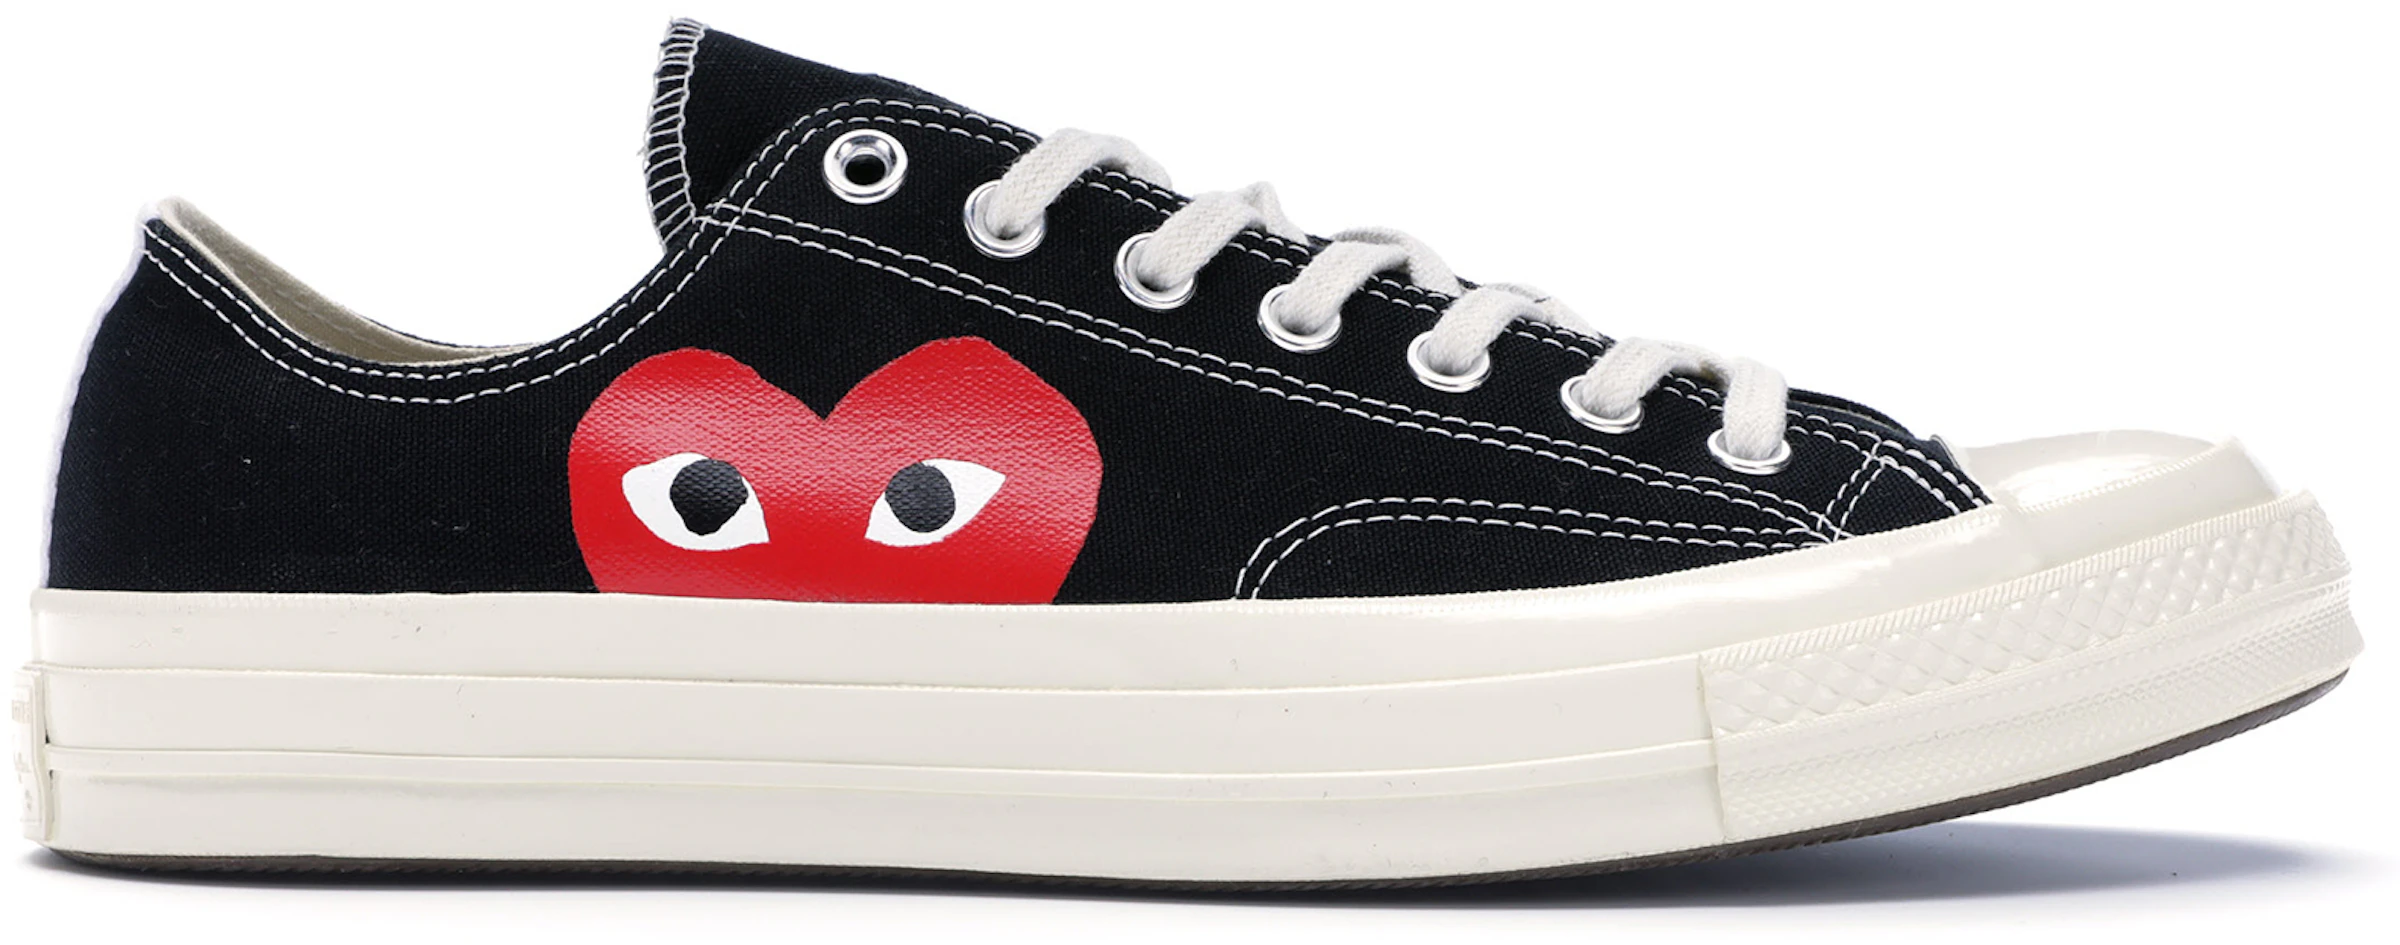 Converse Chuck Taylor All-Star 70 Ox Comme des Garcons PLAY Black - 150206C US